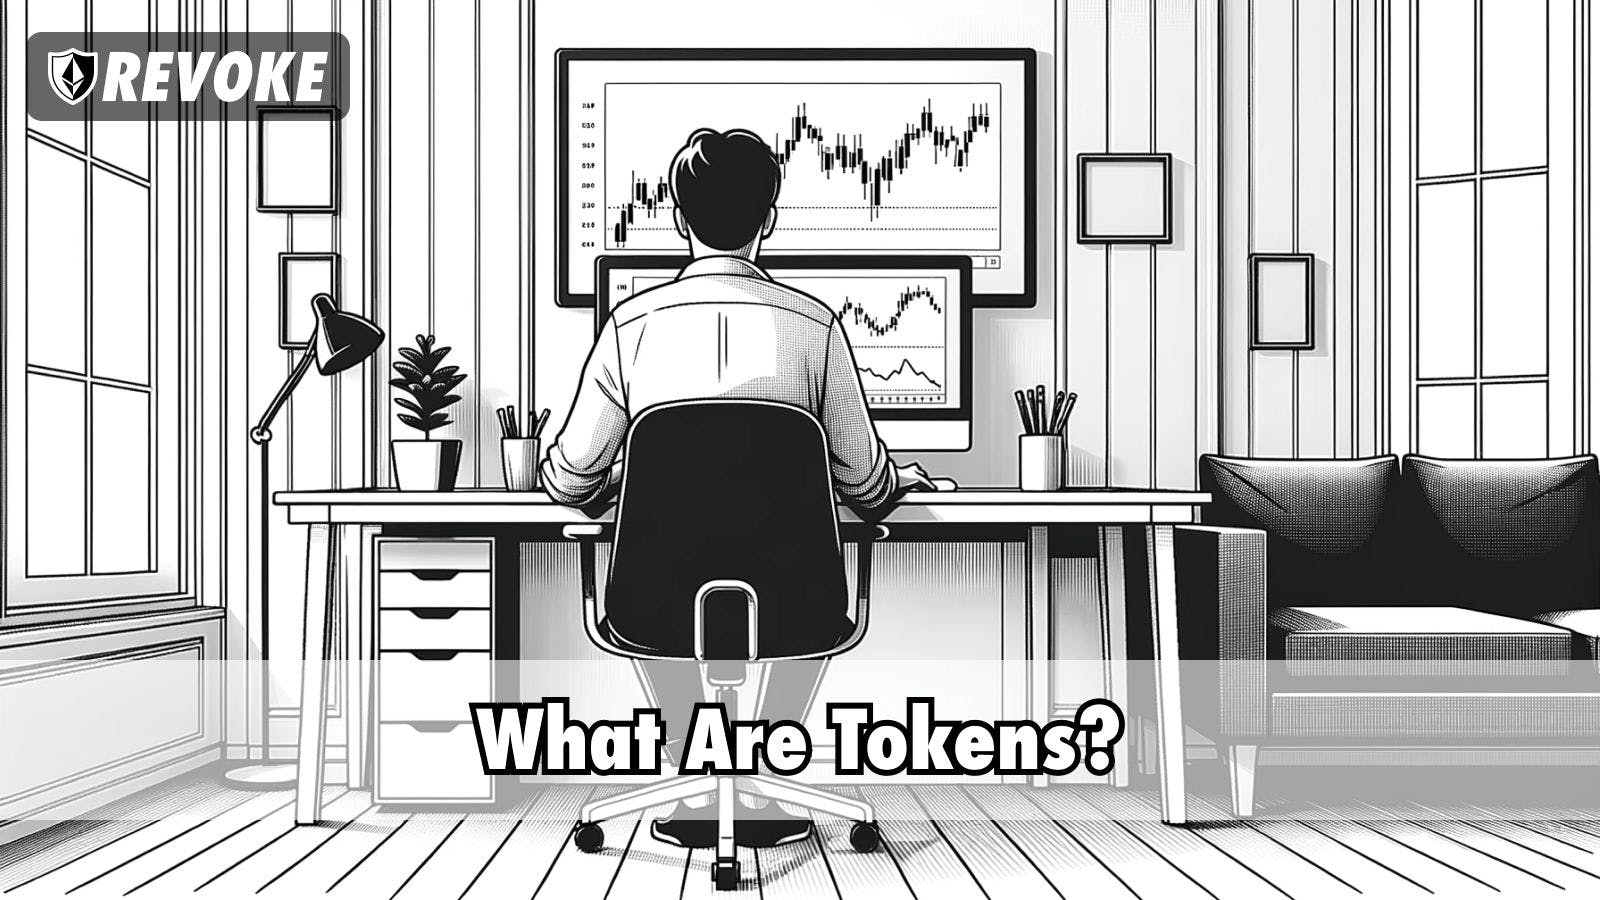 What Are Tokens? Cover Image